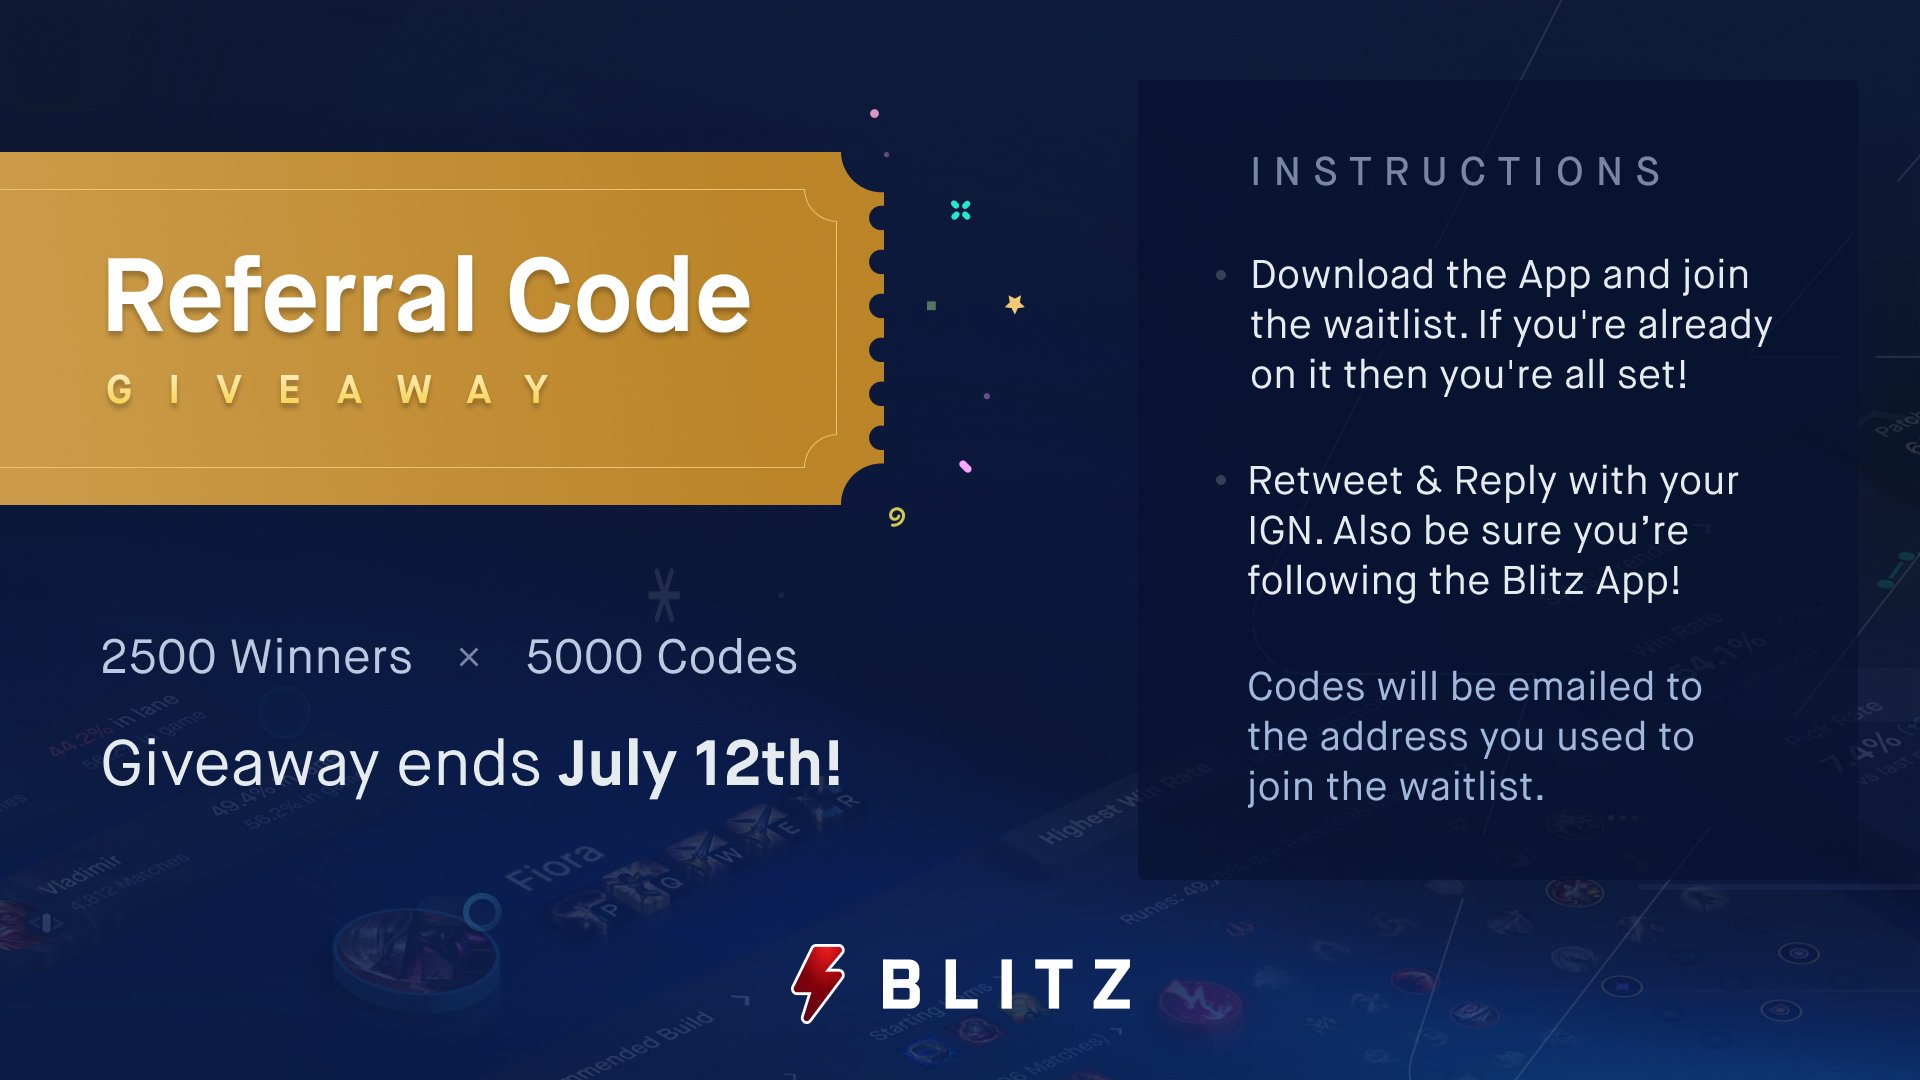 PROMO Codes. Anyone know any promo codes for Golf Blitz. I know two. Will  post below. Thanks. : r/golfblitz